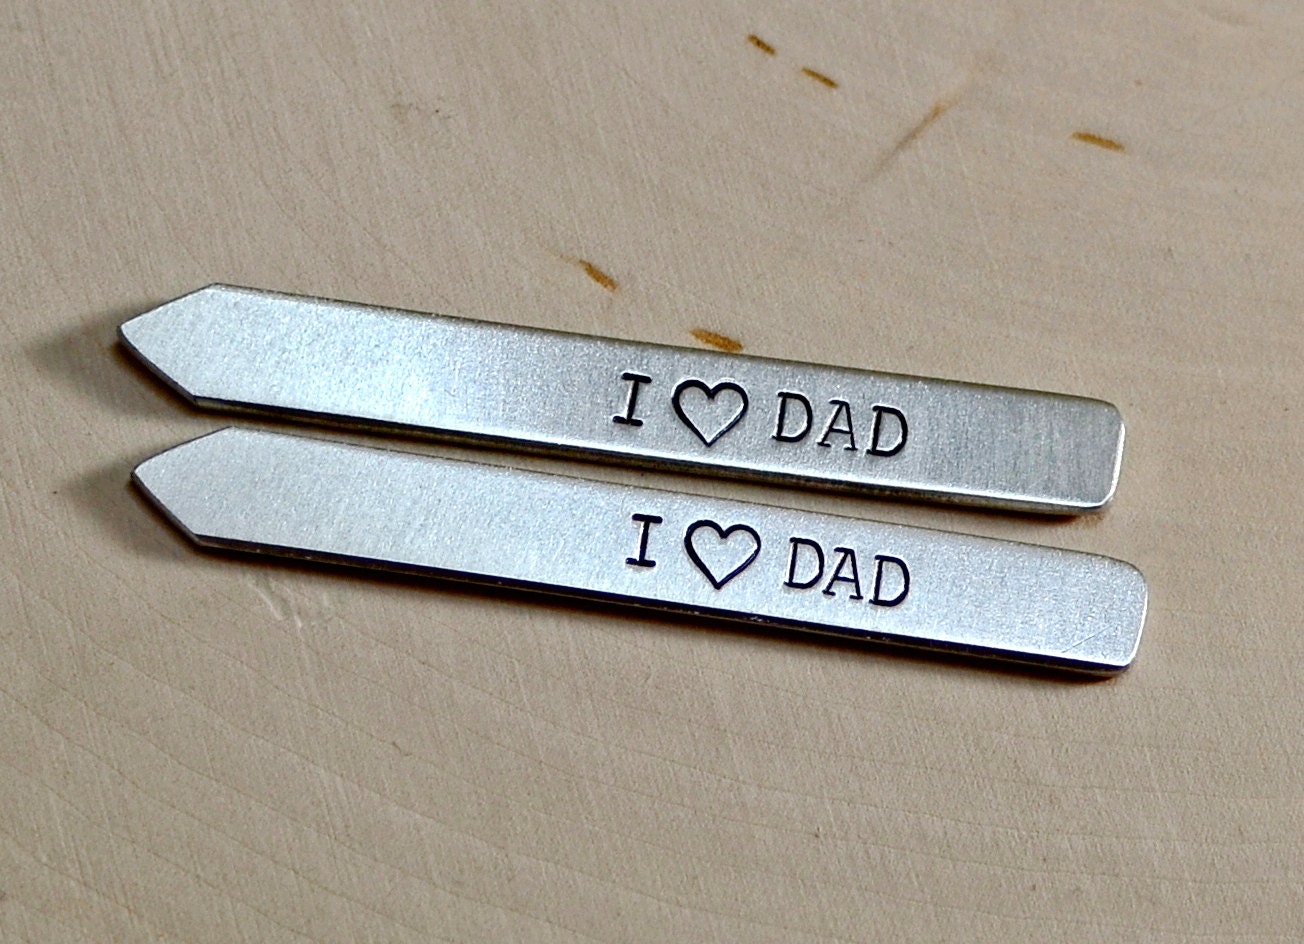 I love dad stamped on aluminum collar stays